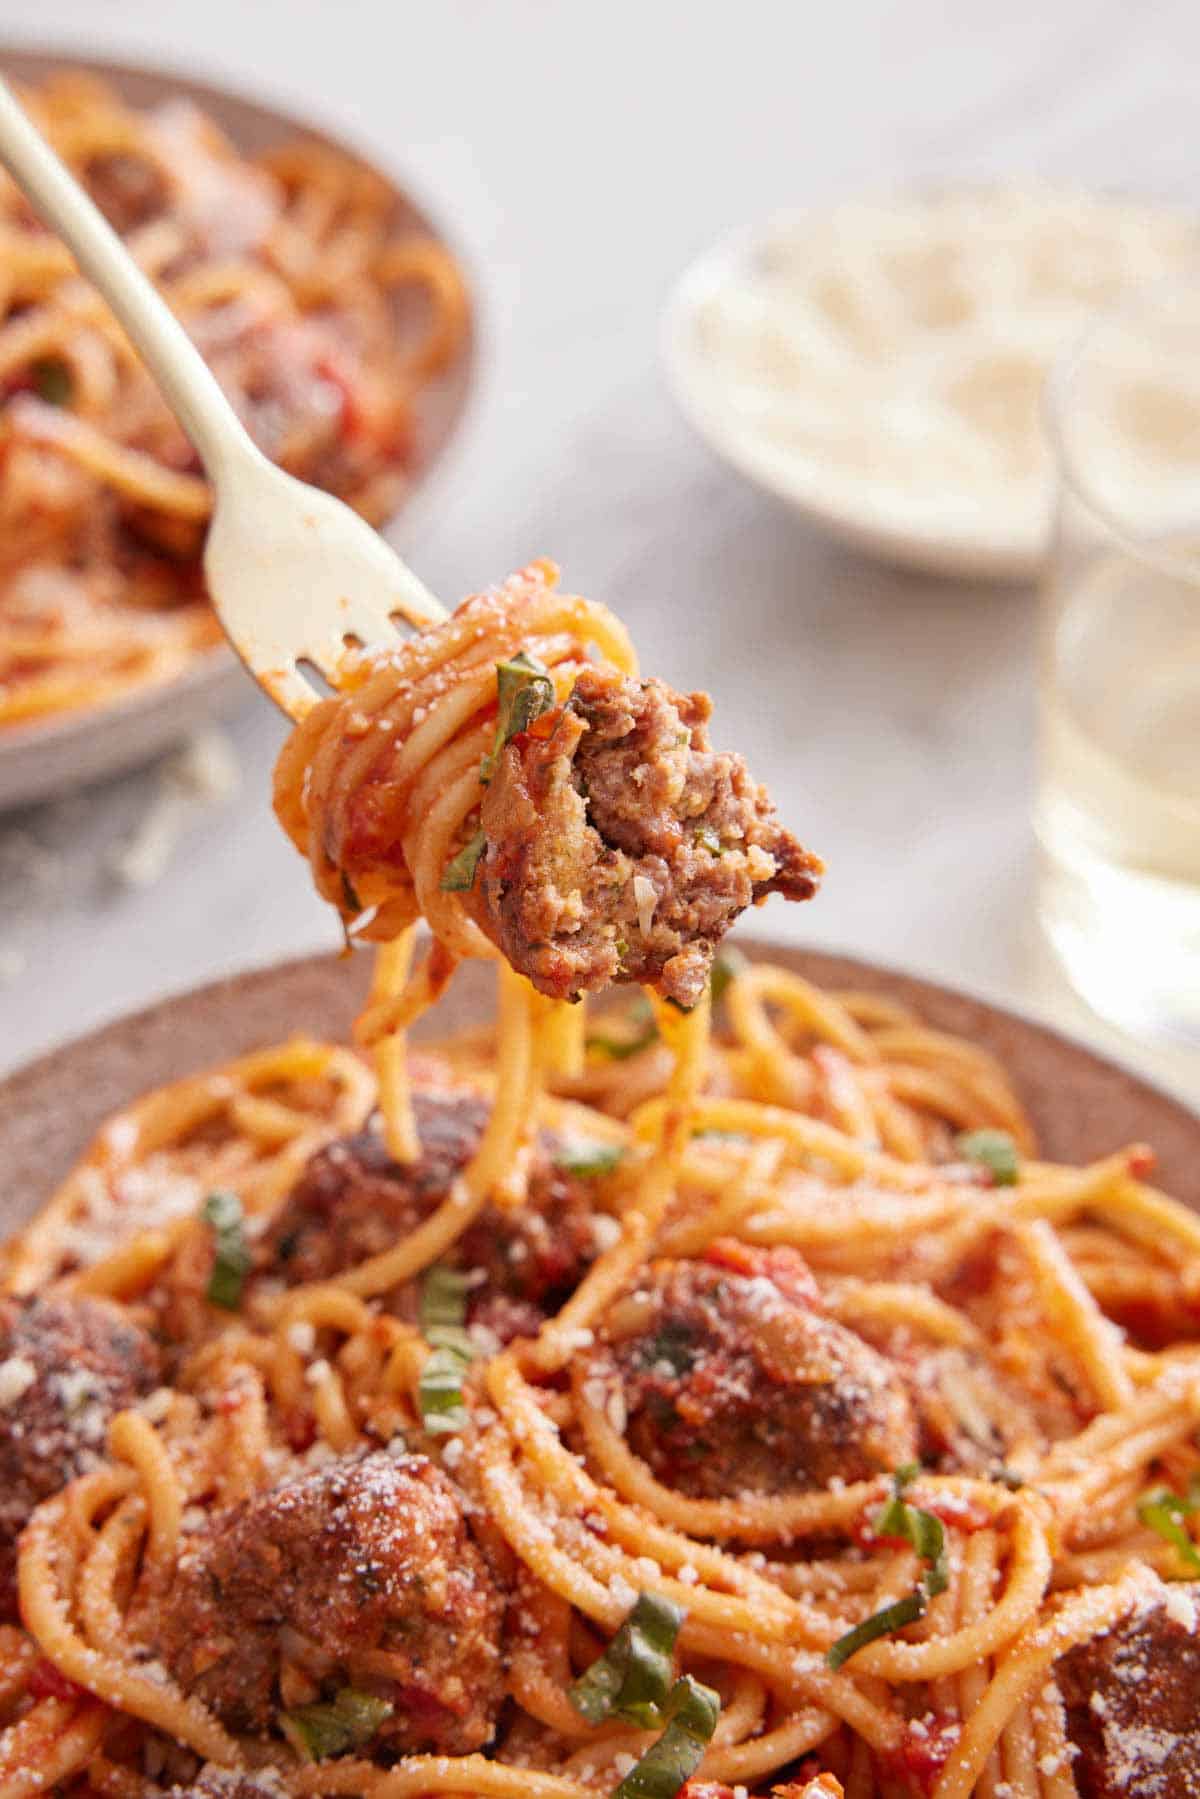 A forkful of spaghetti and meatballs lifted from a plate.